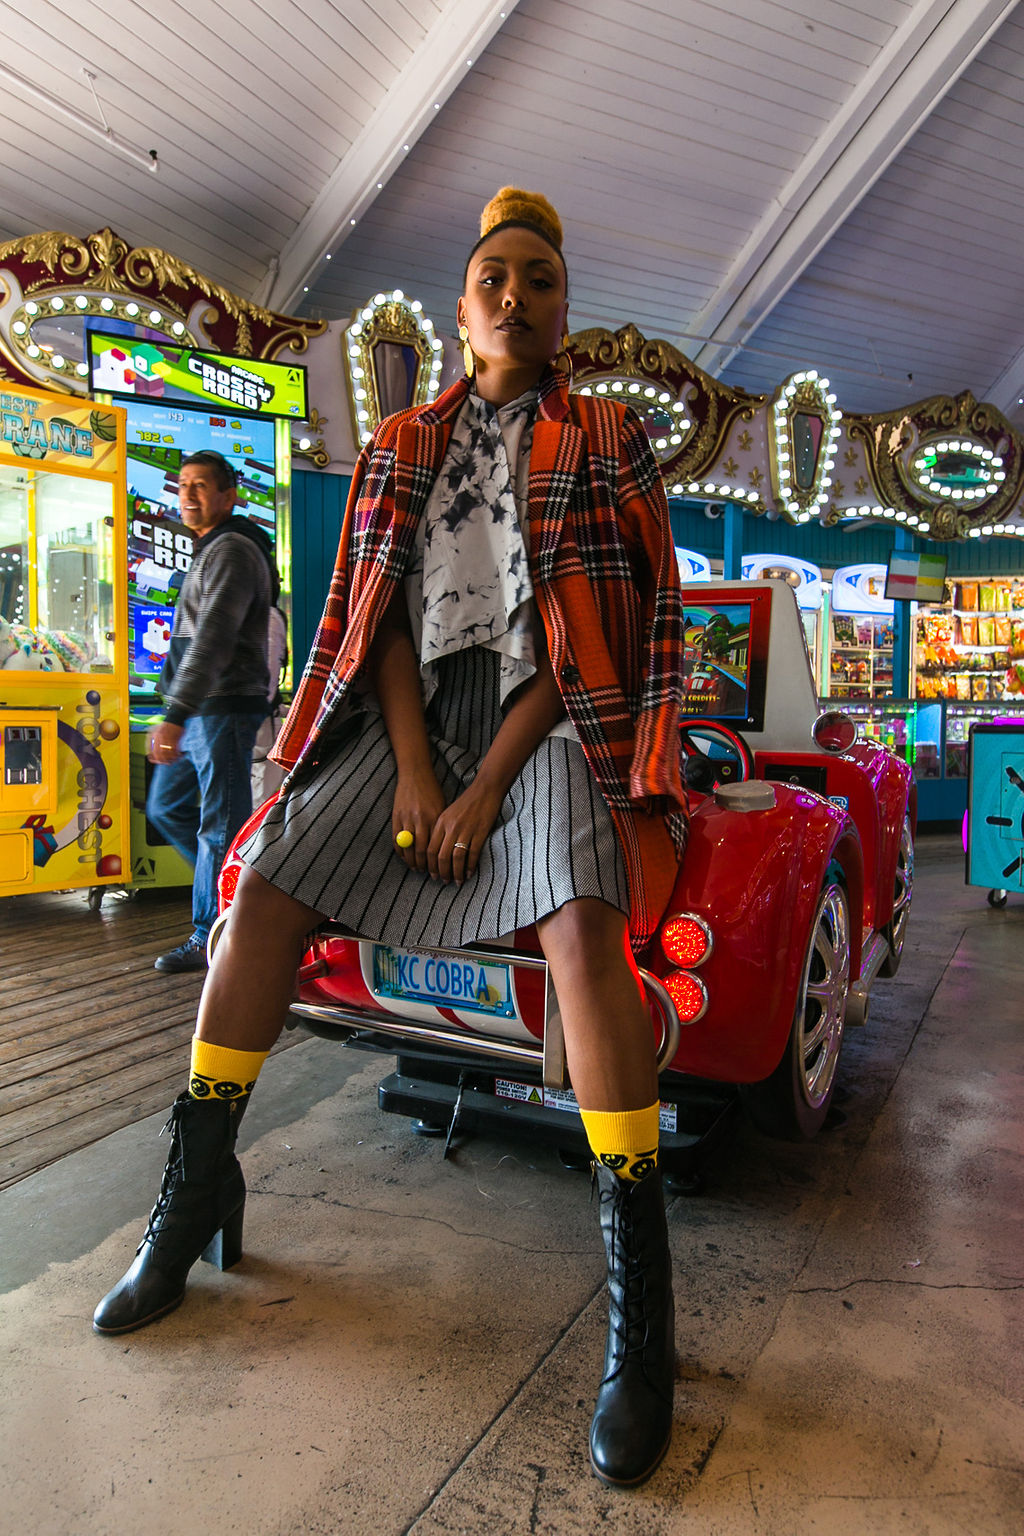 arcade-toy car-fashion photoshoot-nordstrom rack-susina-long beach marina-rsee-xmmtt-wear who you are